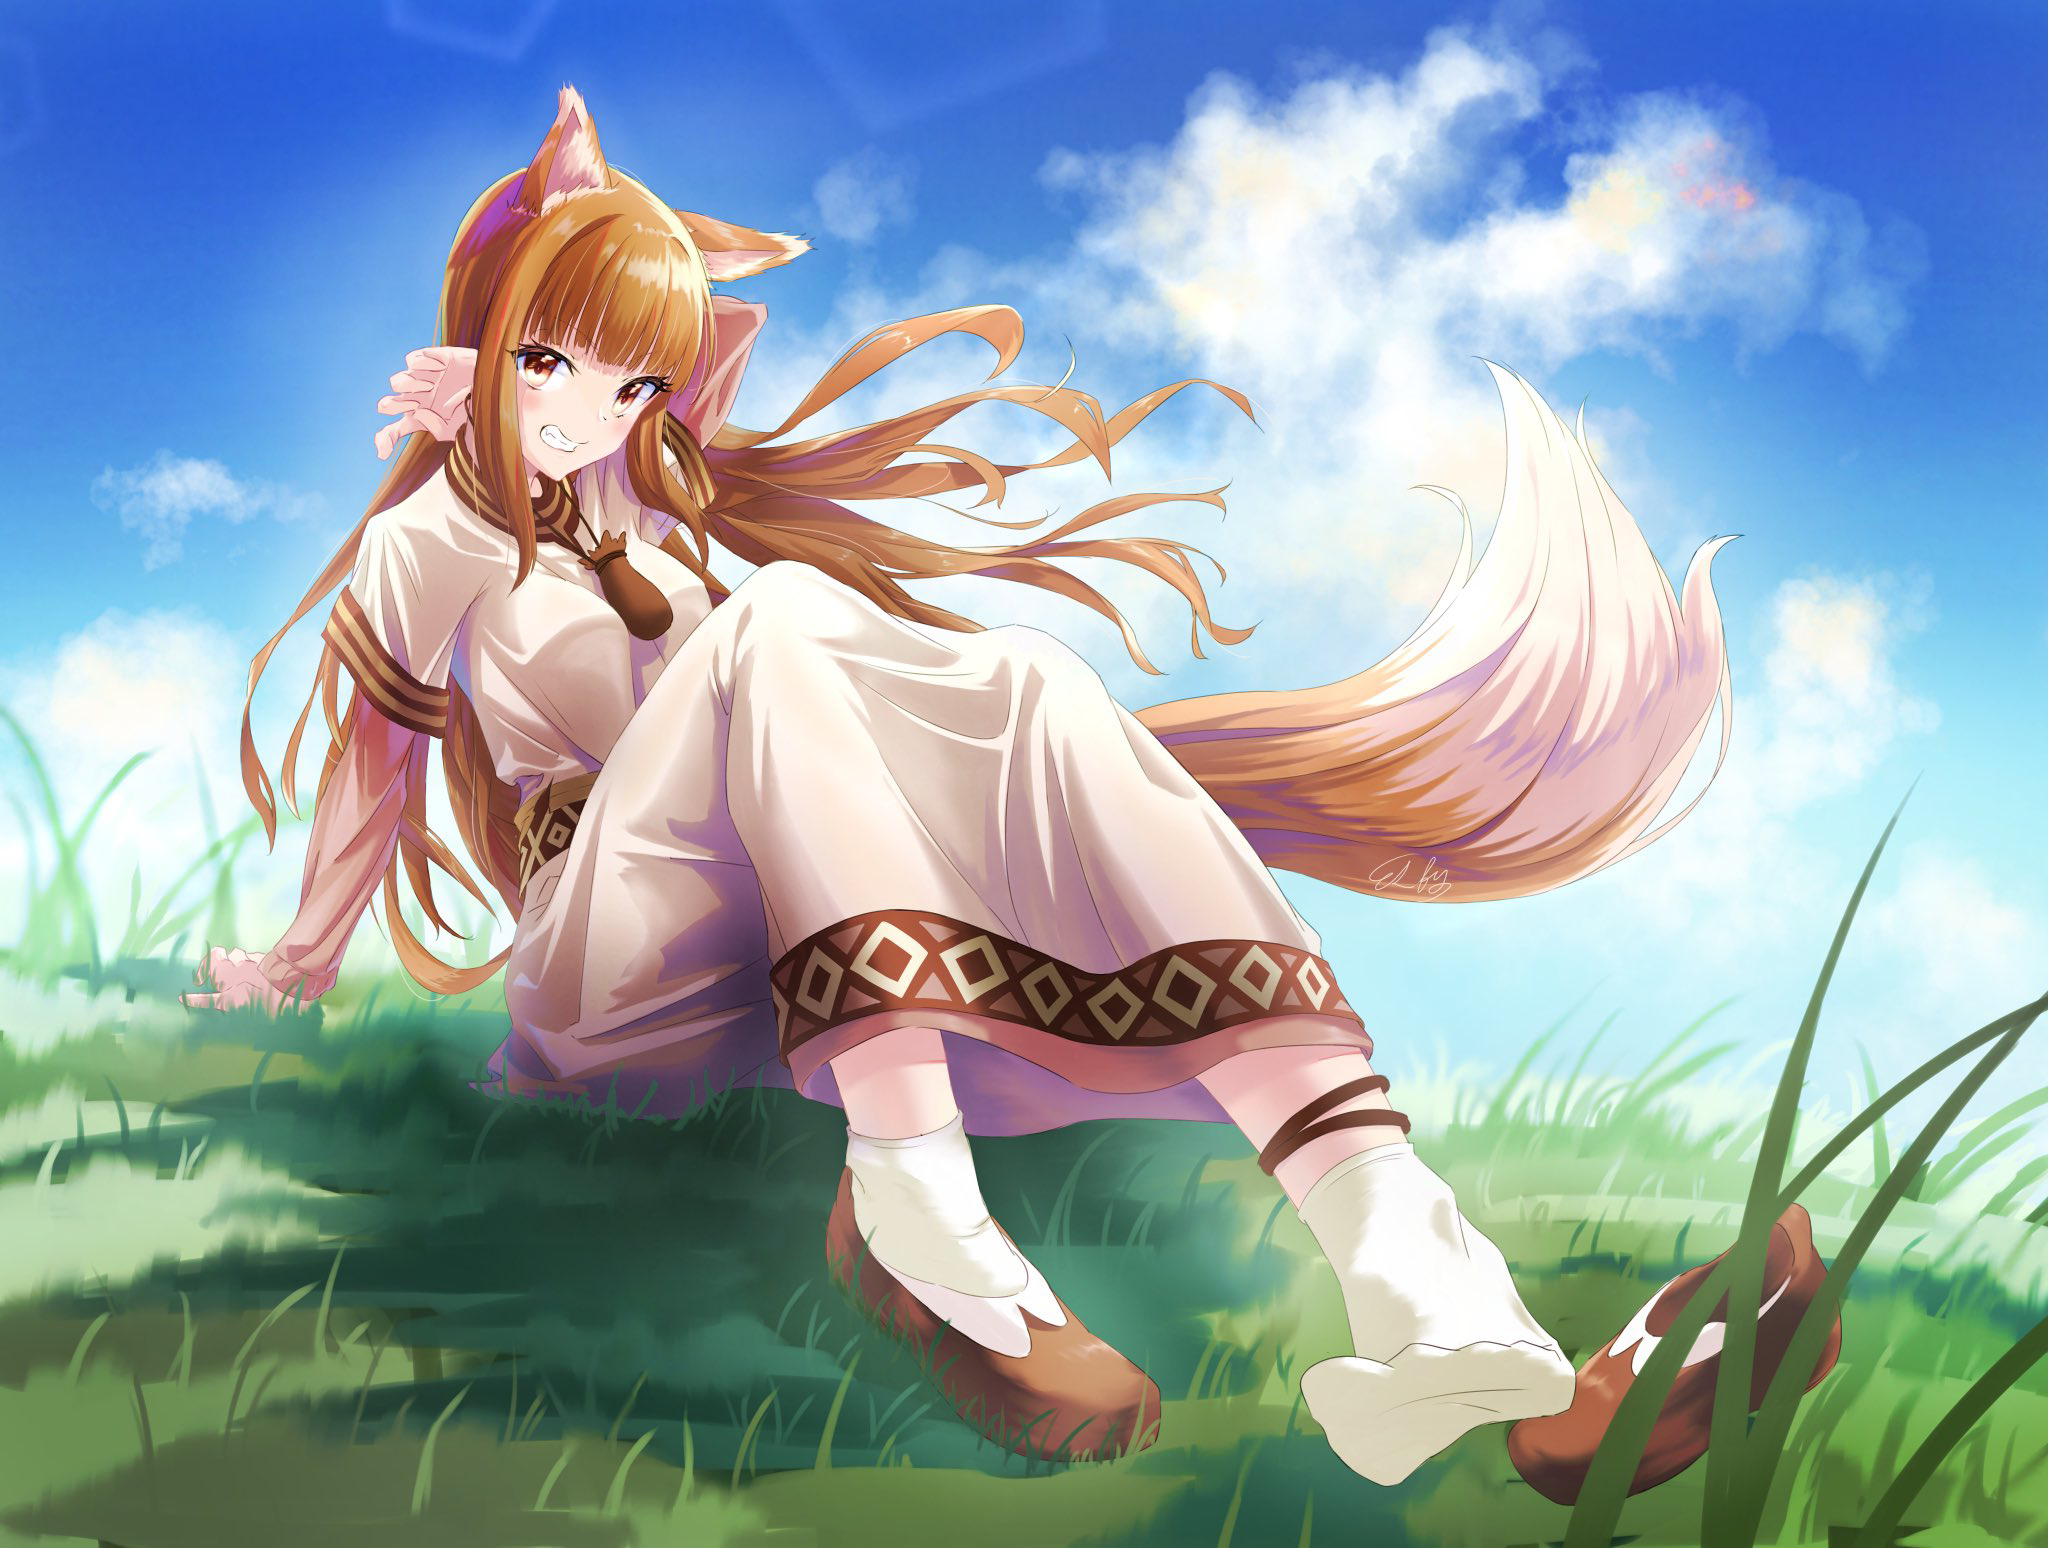 Spice and Wolf Season 3: Release Date, Characters, English Dubbing